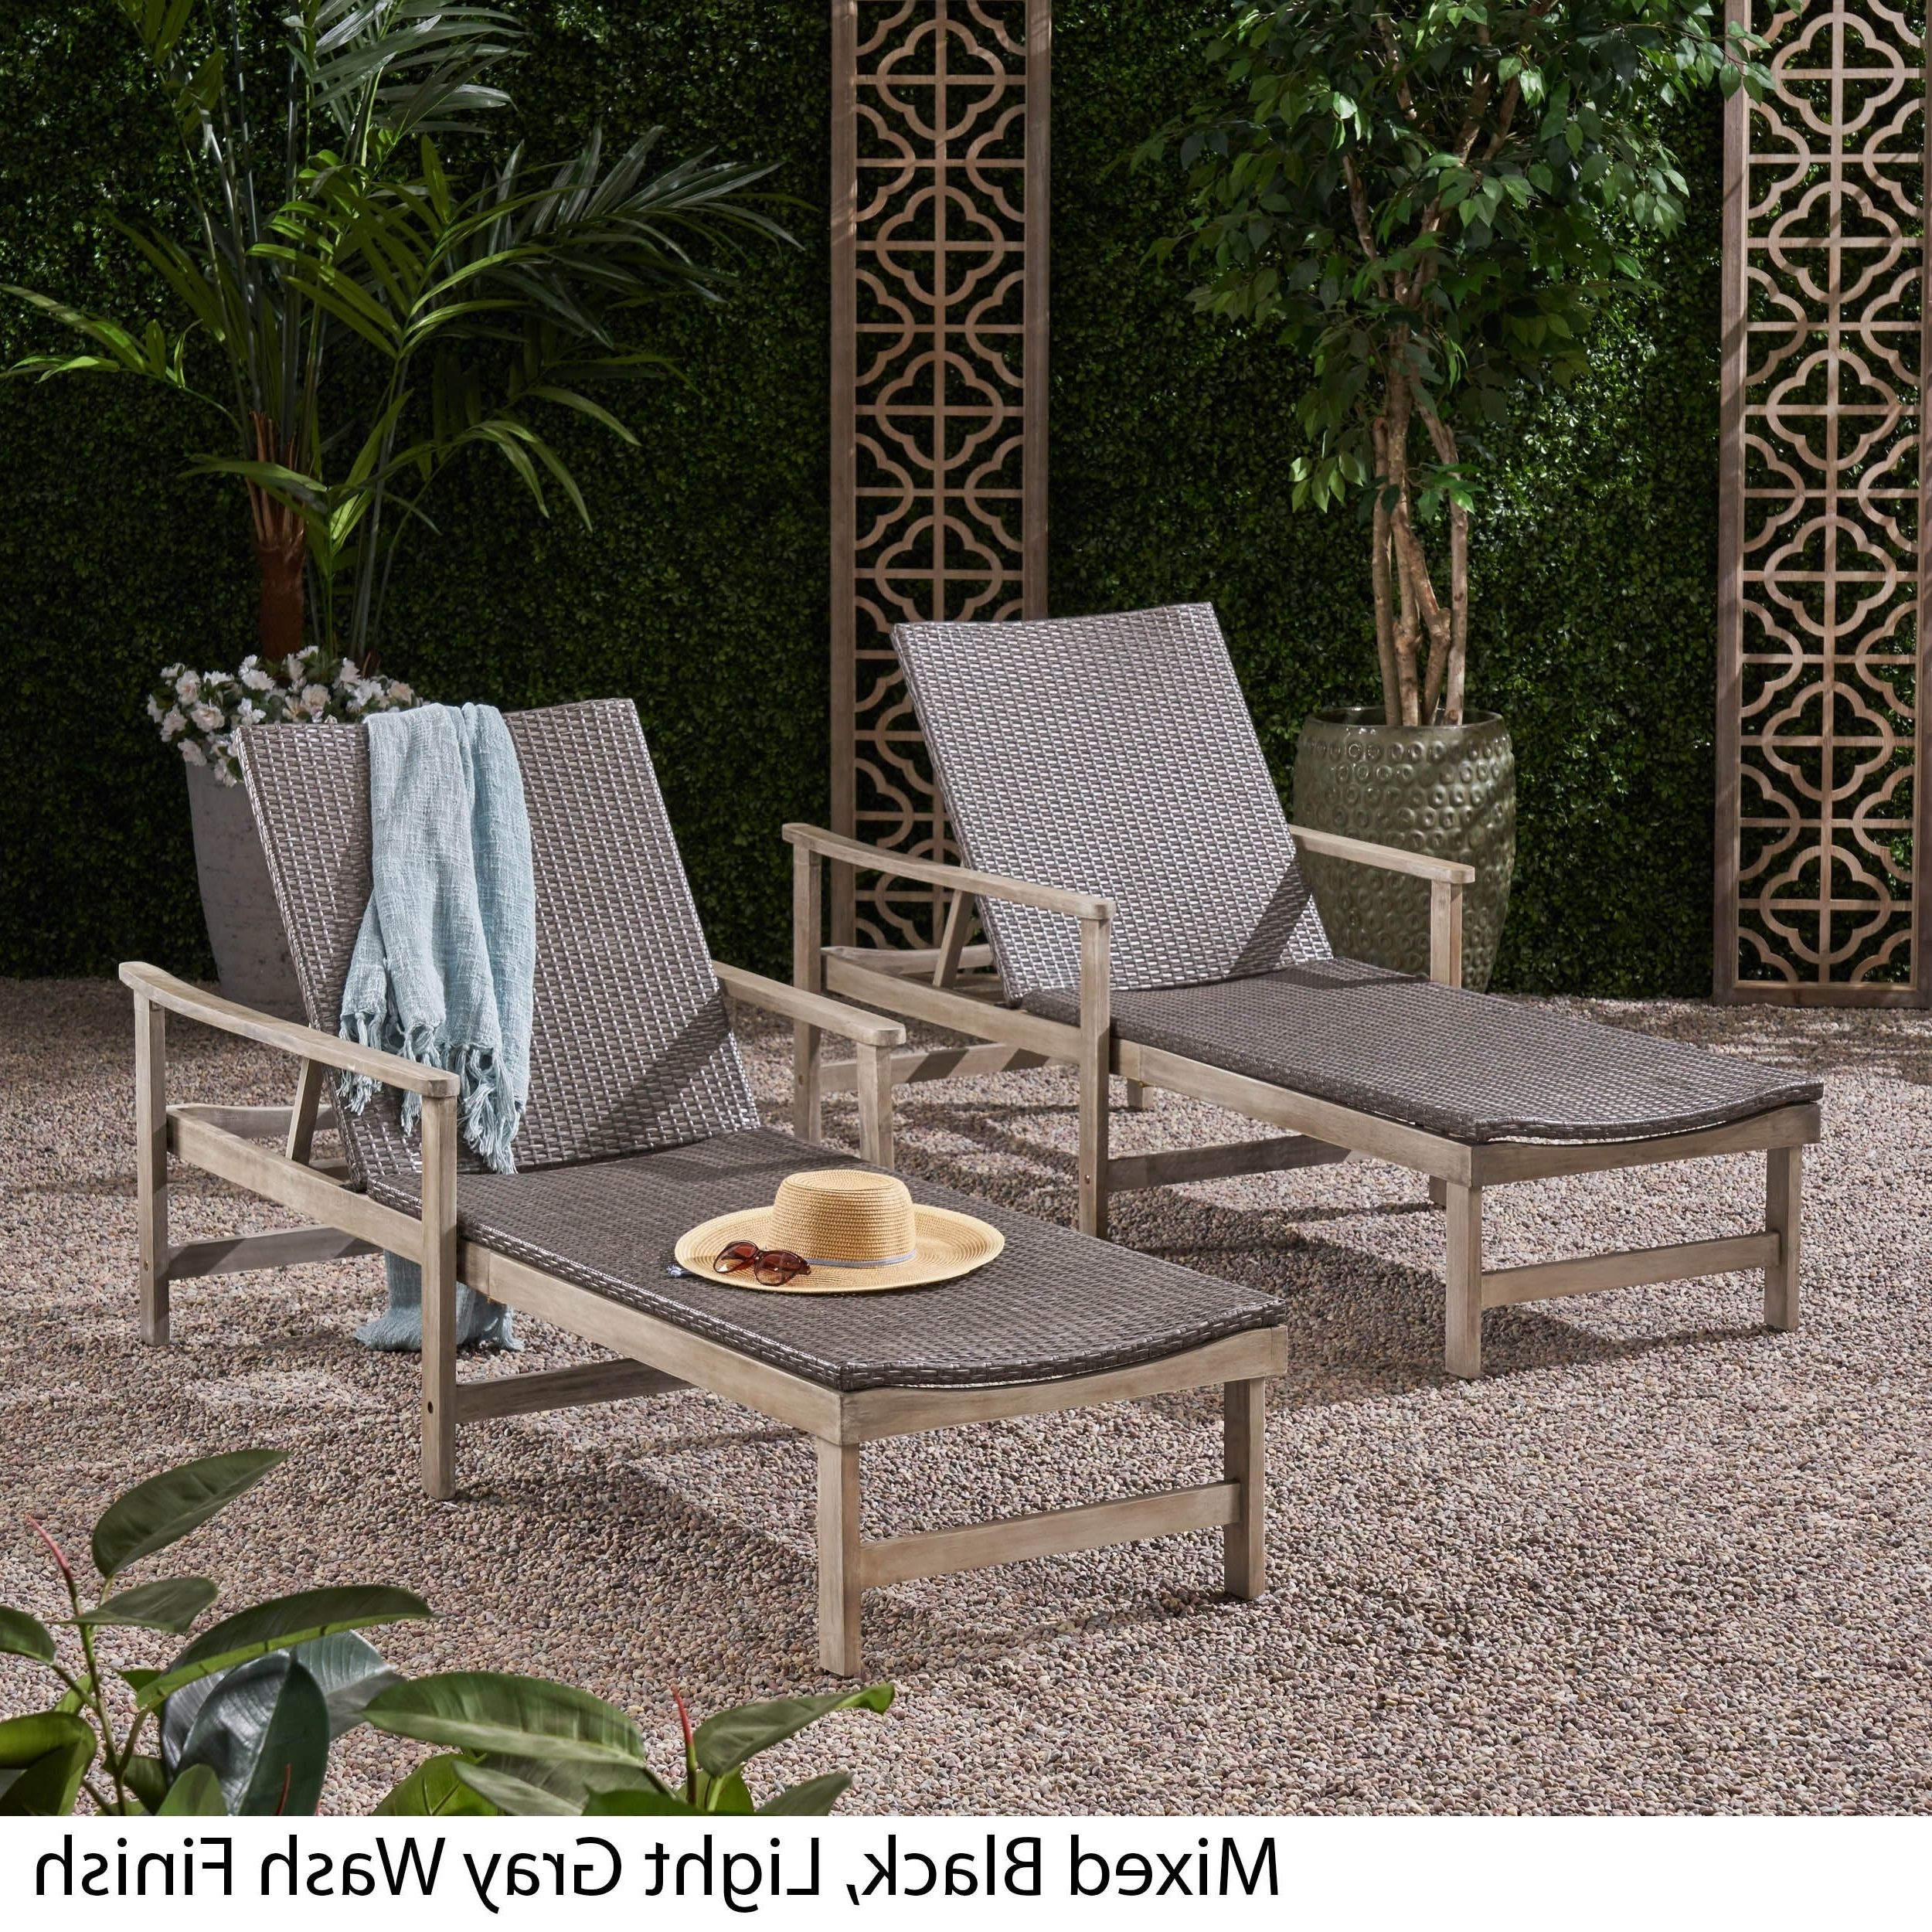 Famous Hampton Outdoor Chaise Lounges Acacia Wood And Wicker In Hampton Outdoor Chaise Lounges Acacia Wood And Wicker (set Of 2) Christopher Knight Home (View 9 of 25)